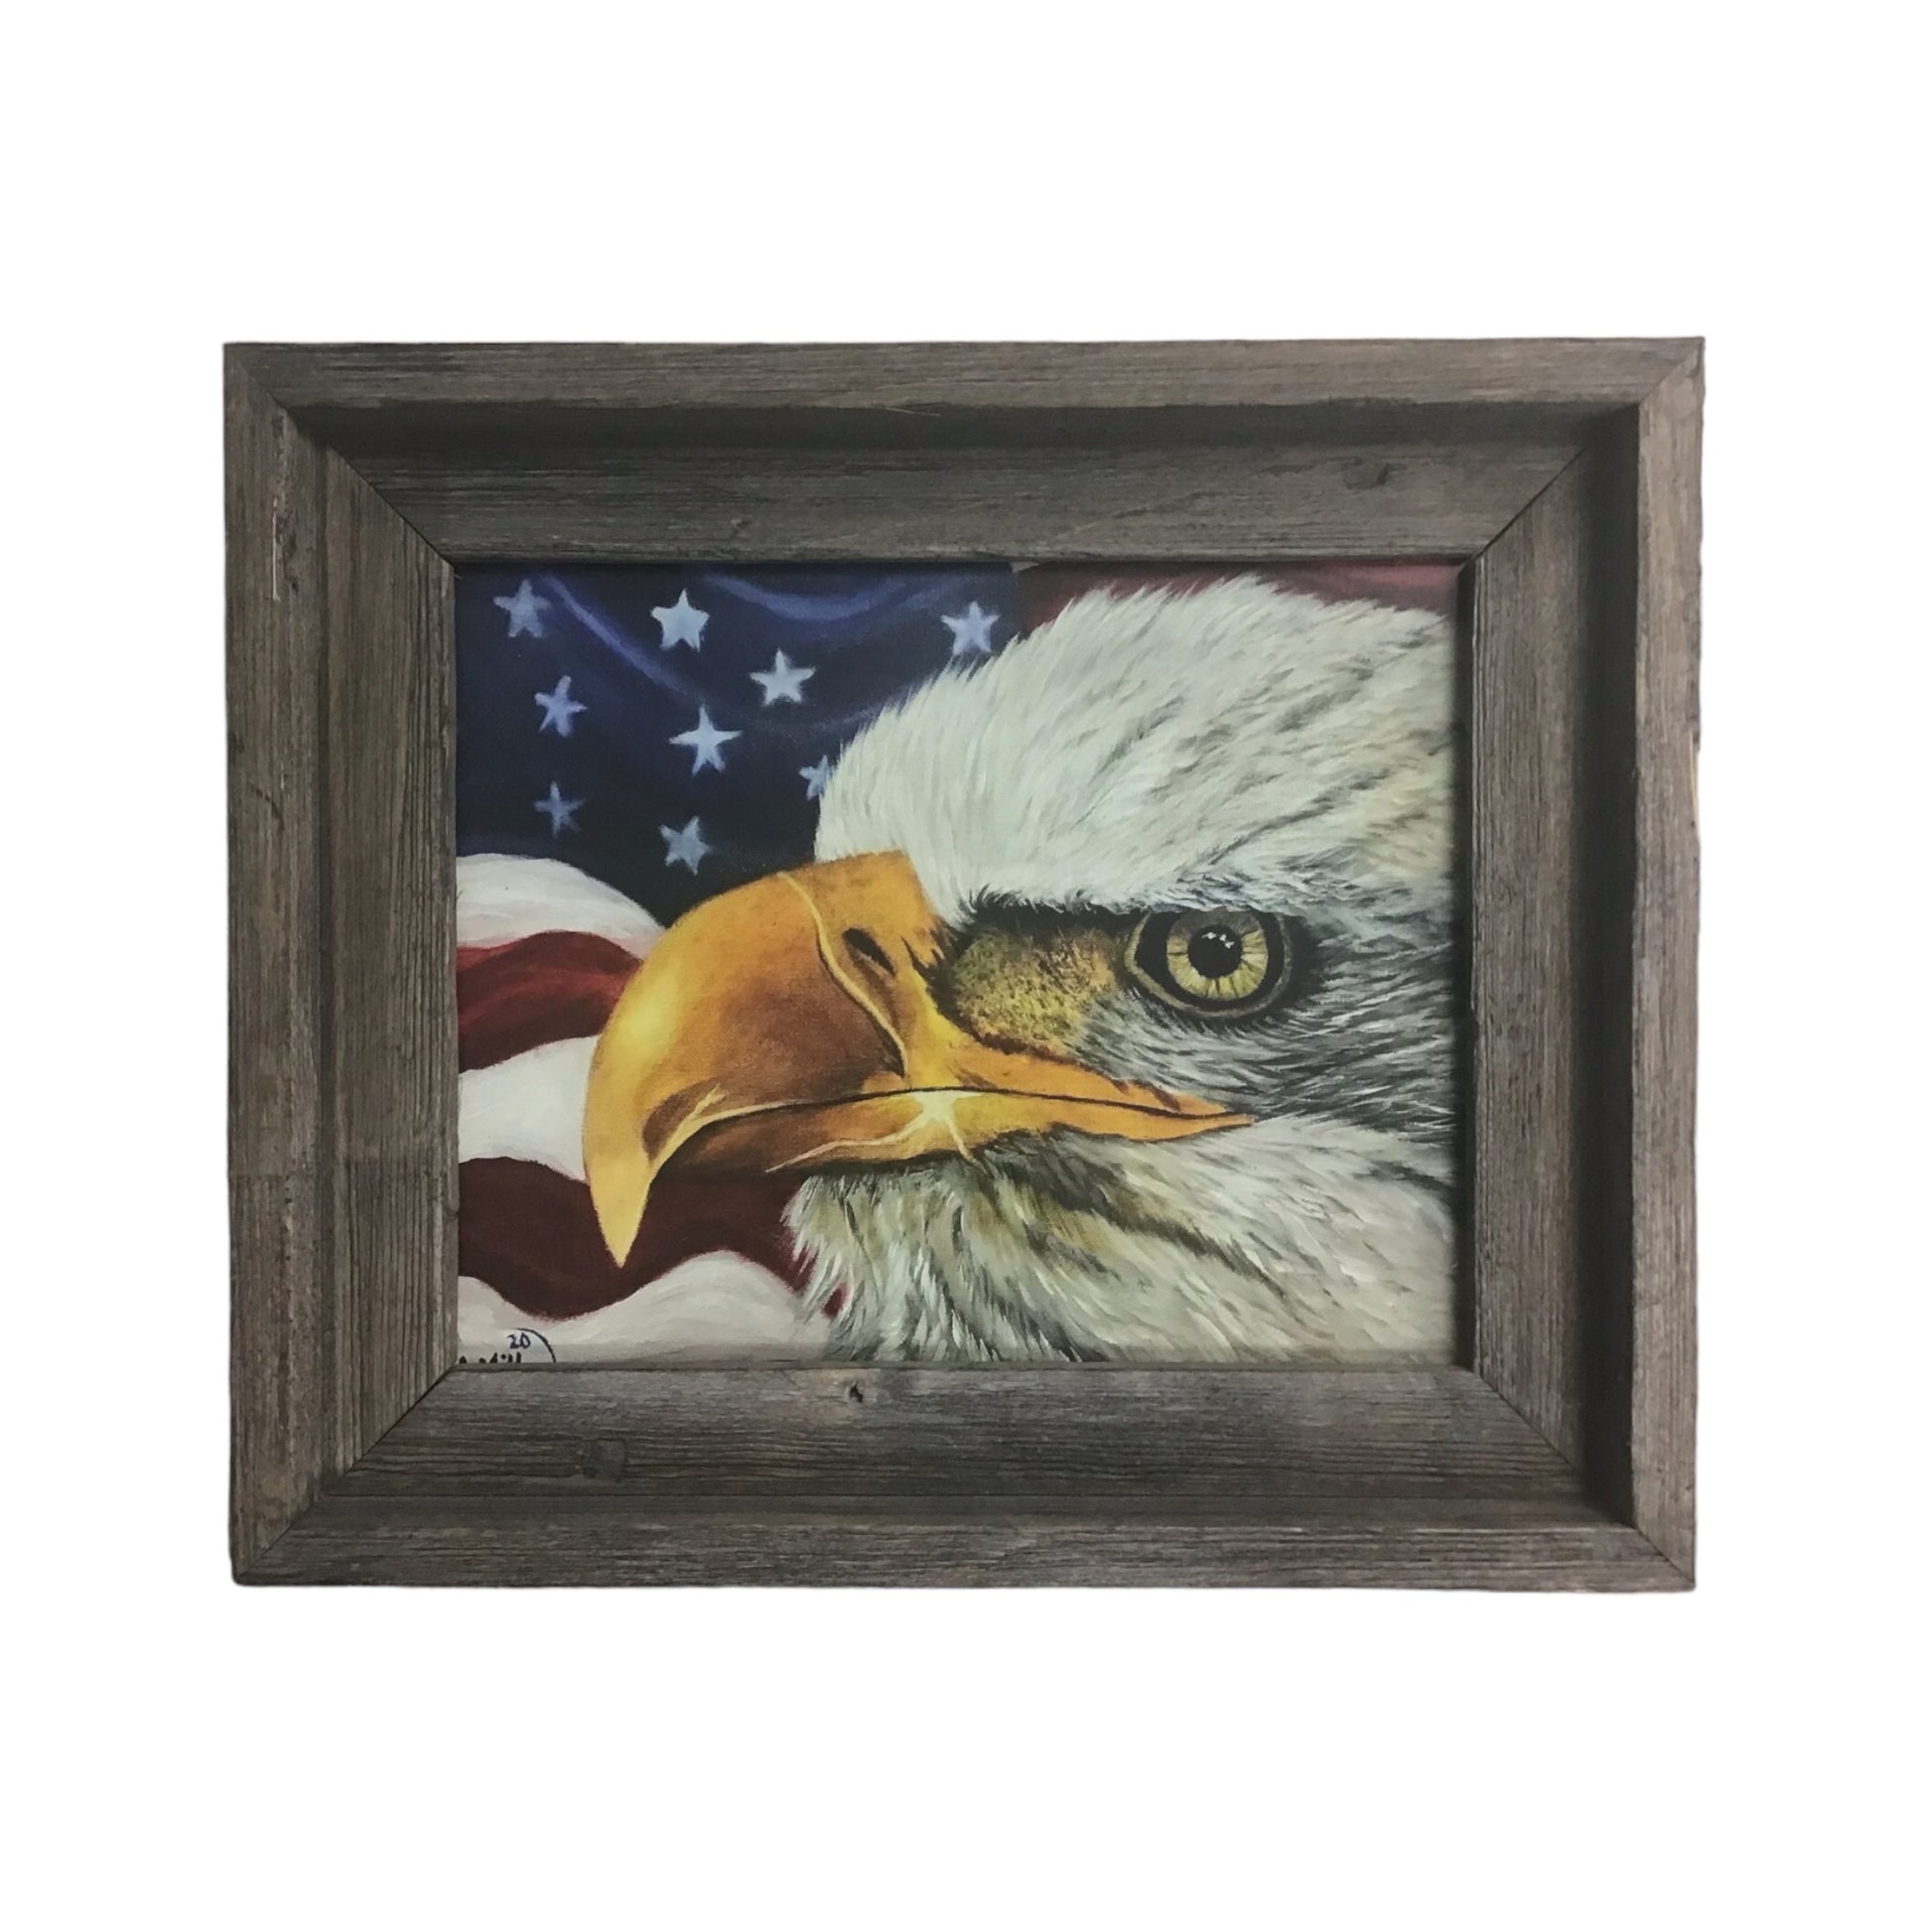 Framed print of a bald eagle against a backdrop of a waving American flag